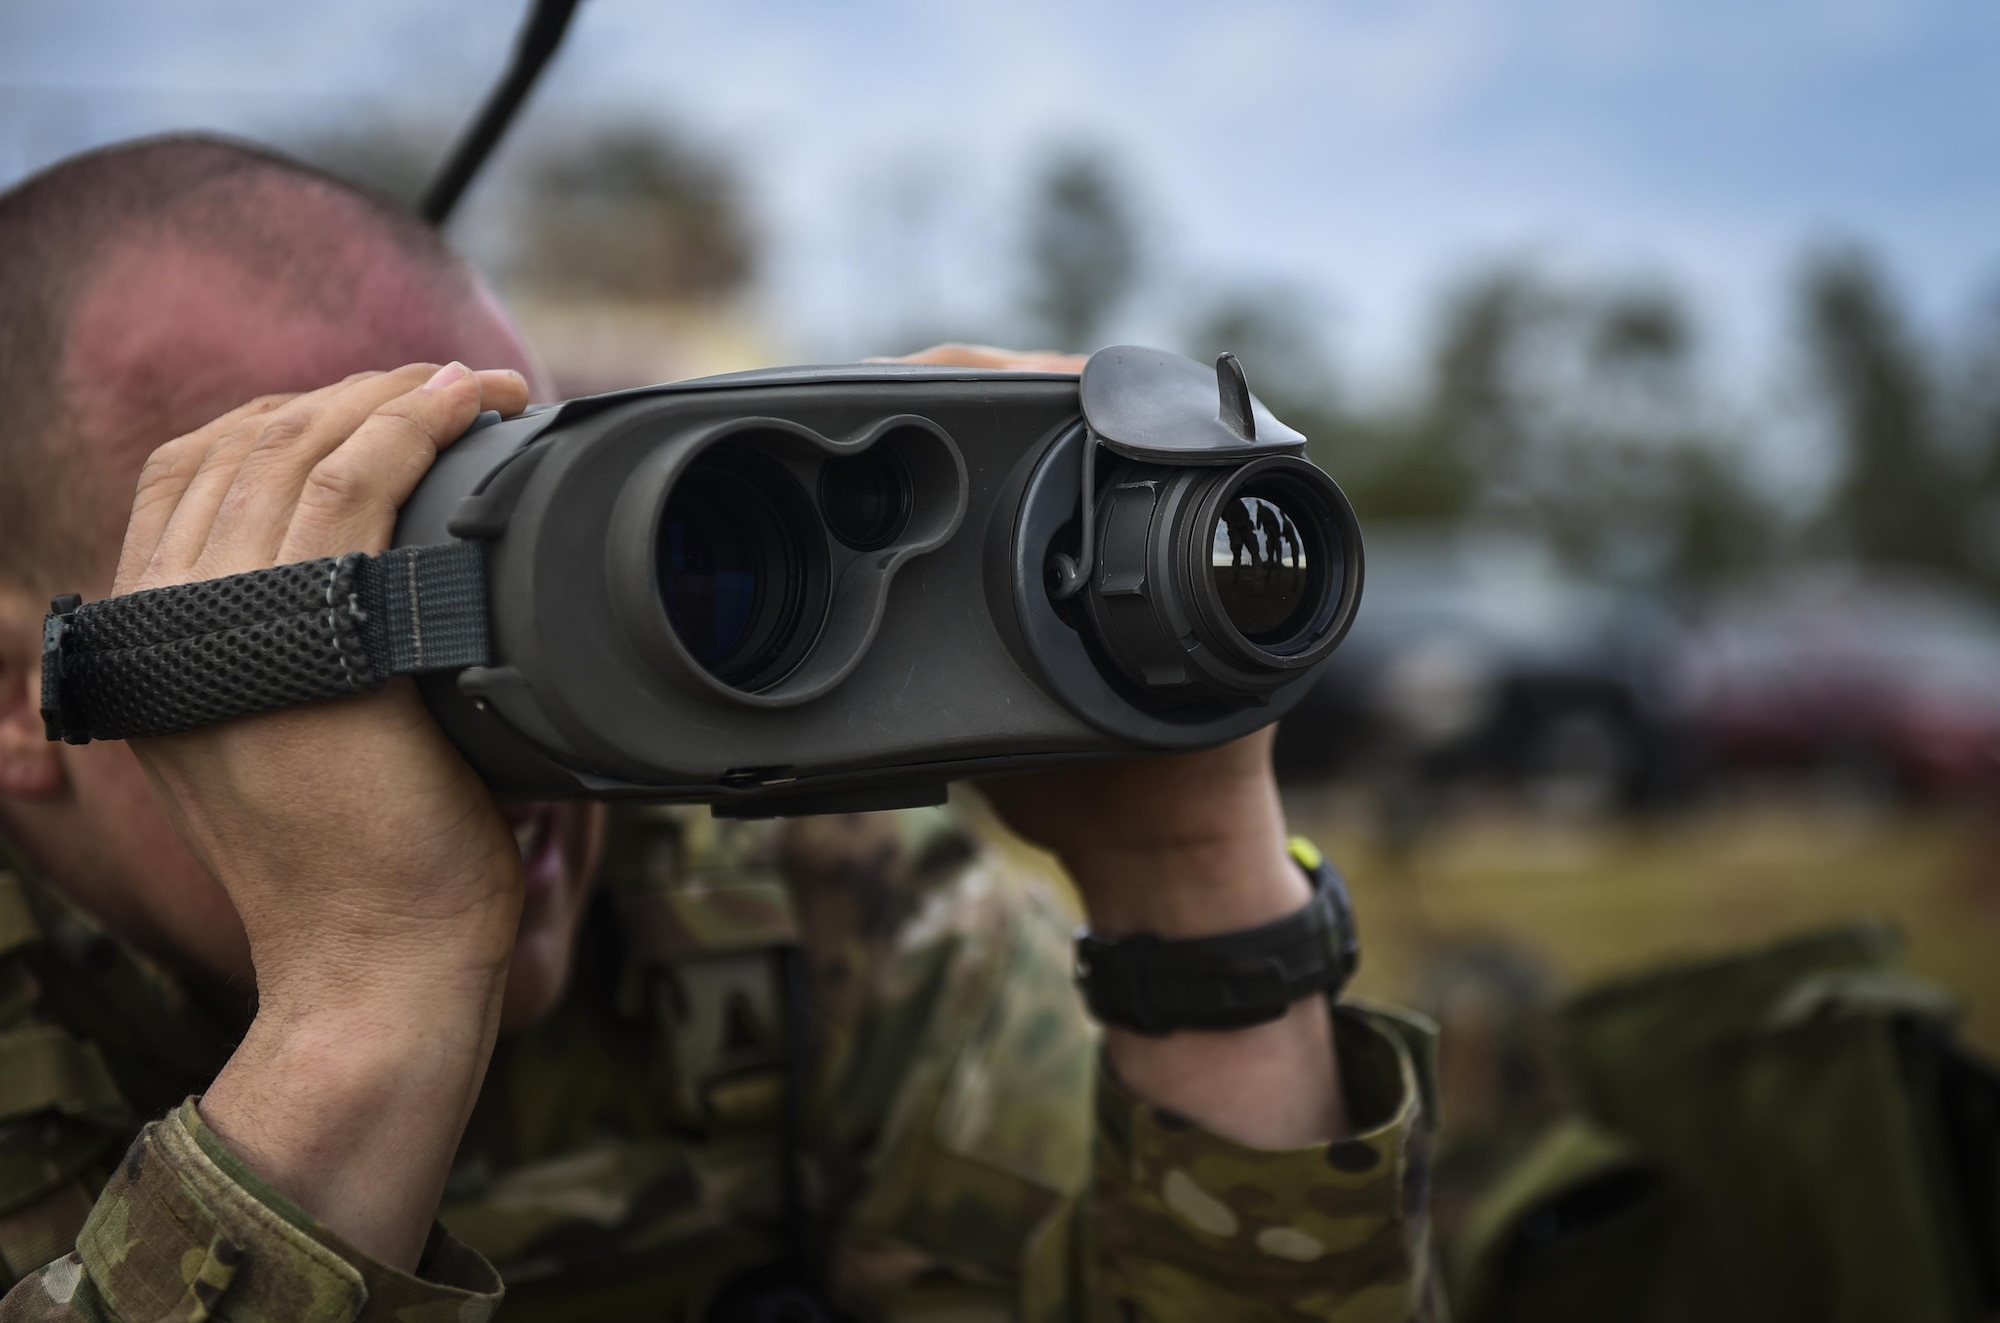 A Soldier with the 1st Battalion, 10th Special Forces Group, uses a laser rangefinder at the Eglin Range, Eglin Air Force Base, Fla., March 17, 2017. Soldiers use the laser rangefinder to identify target location distance, day or night, and with limited visibility such as fog or smoke. (U.S. Air Force photo by Airman 1st Class Joseph Pick)